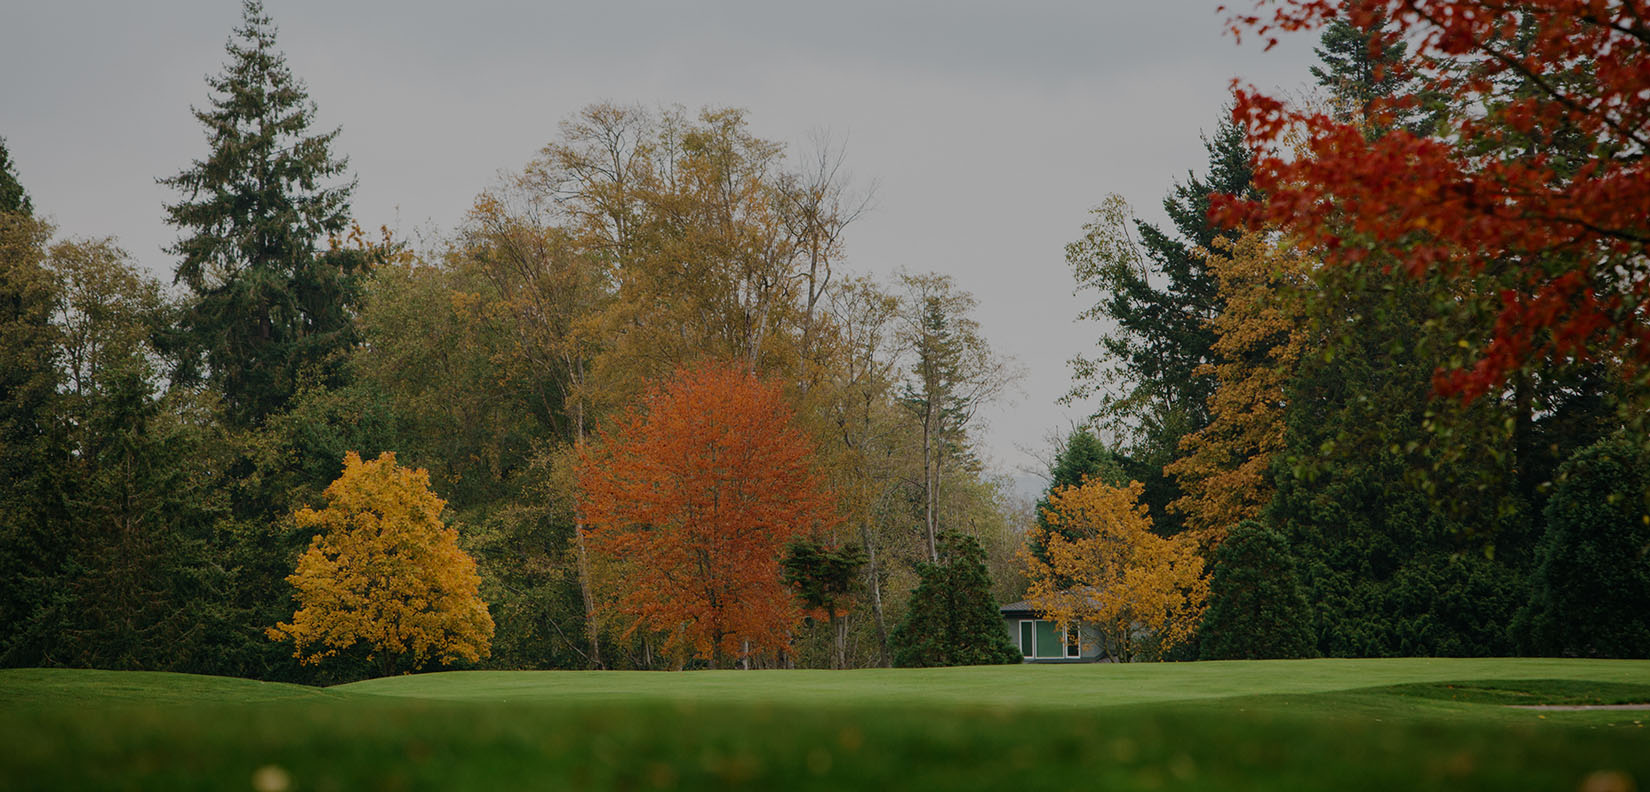 golfcourse with fall trees